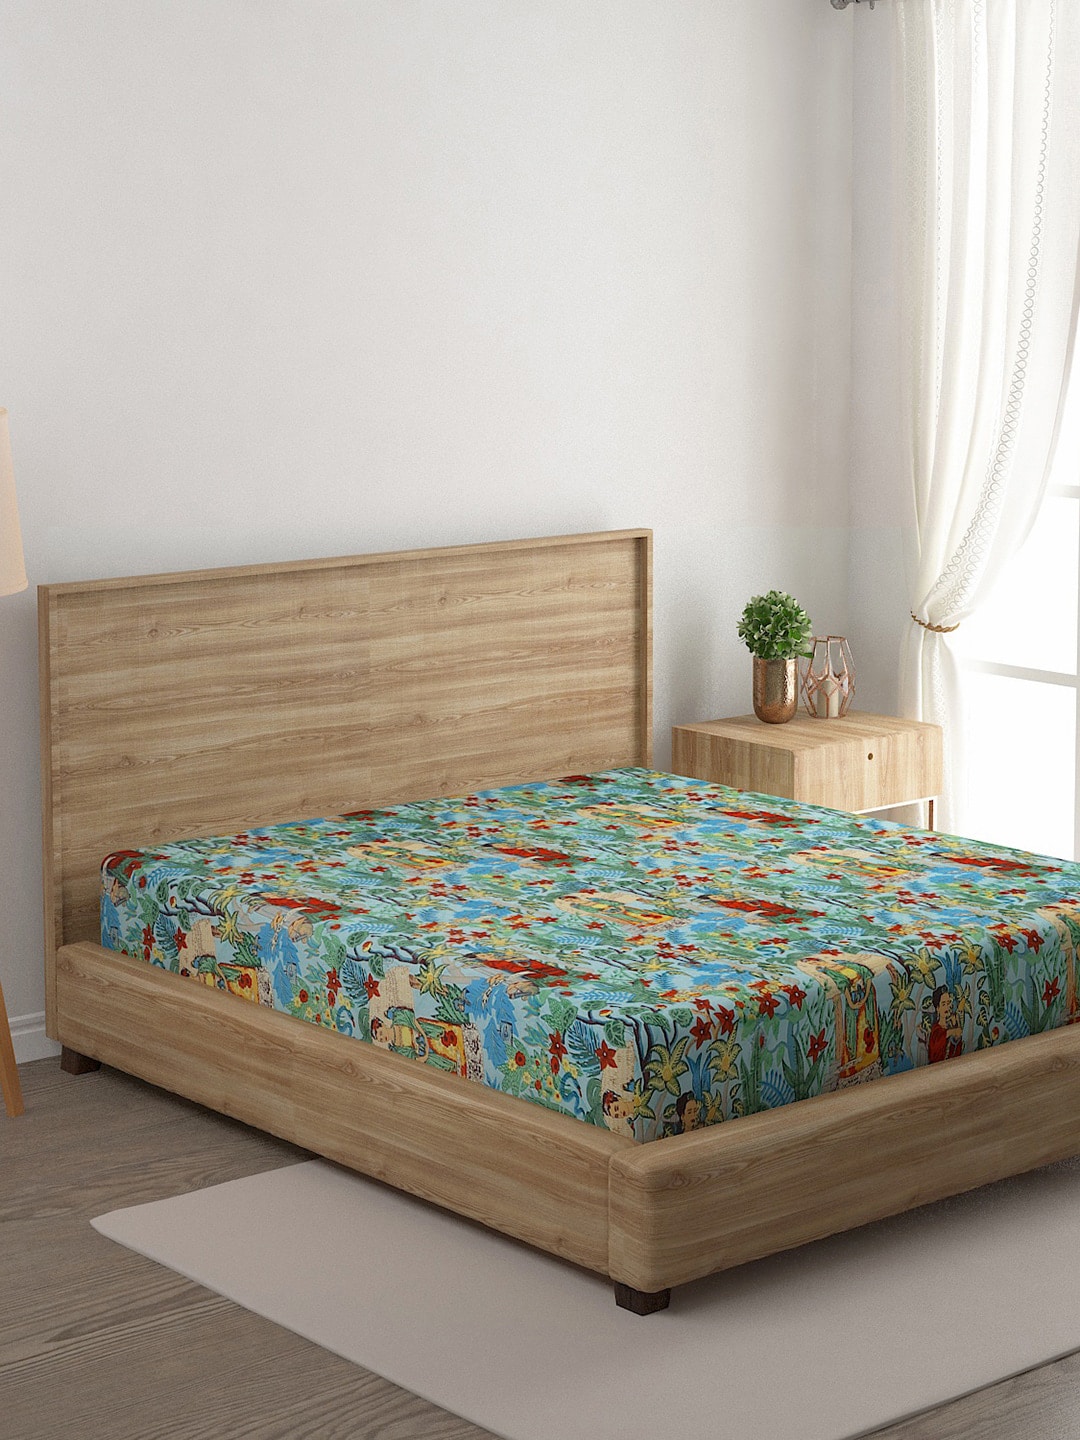 Rajasthan Decor Blue & Green Printed Cotton King Size Mattress Protector Price in India